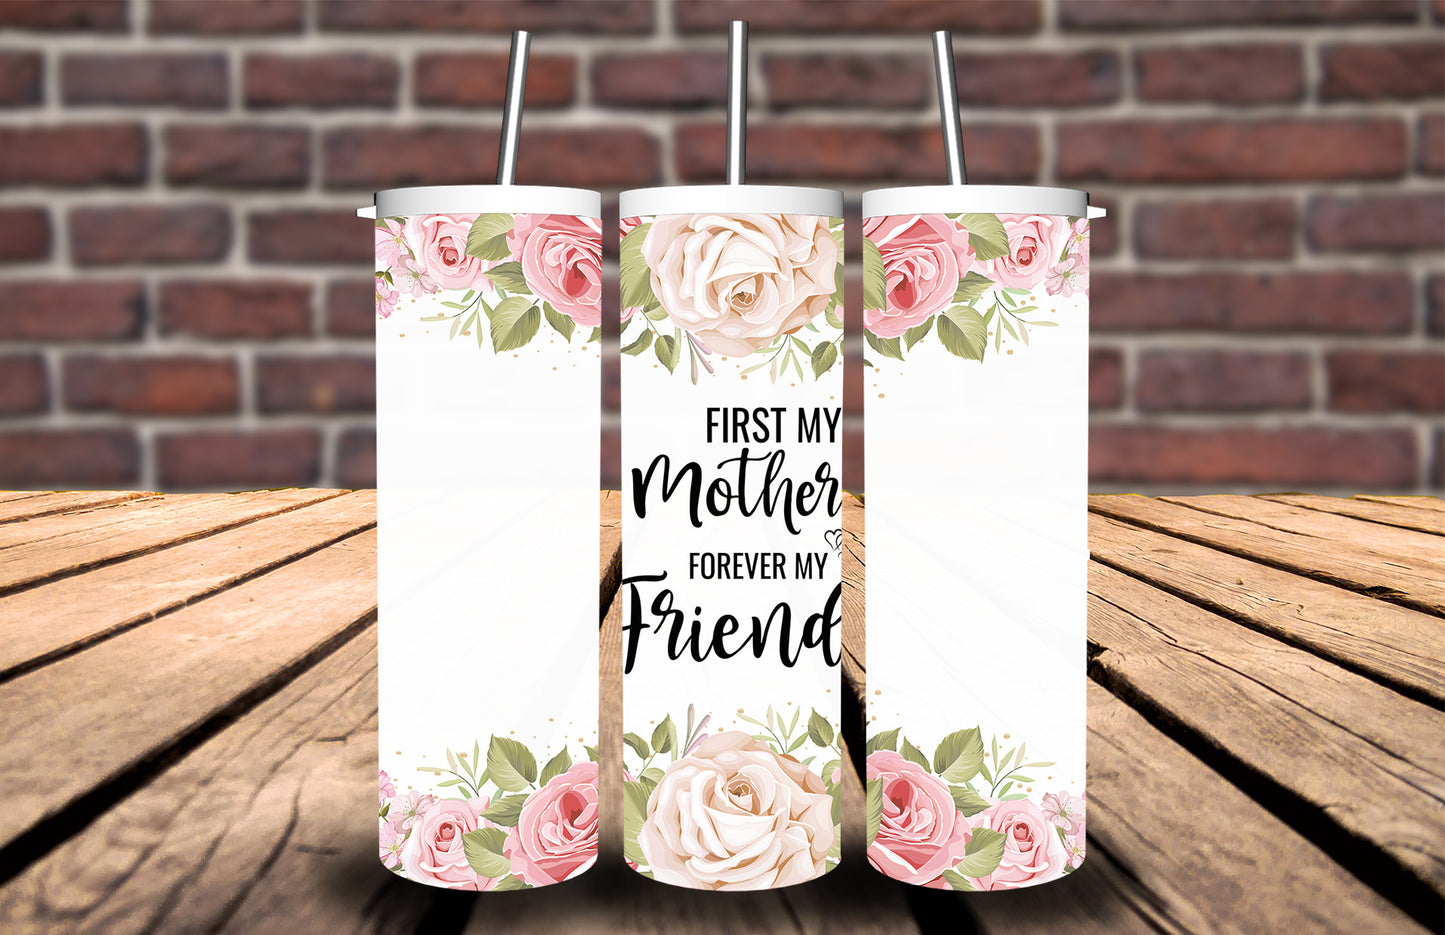 First My Mother Forever My Friend Tumbler